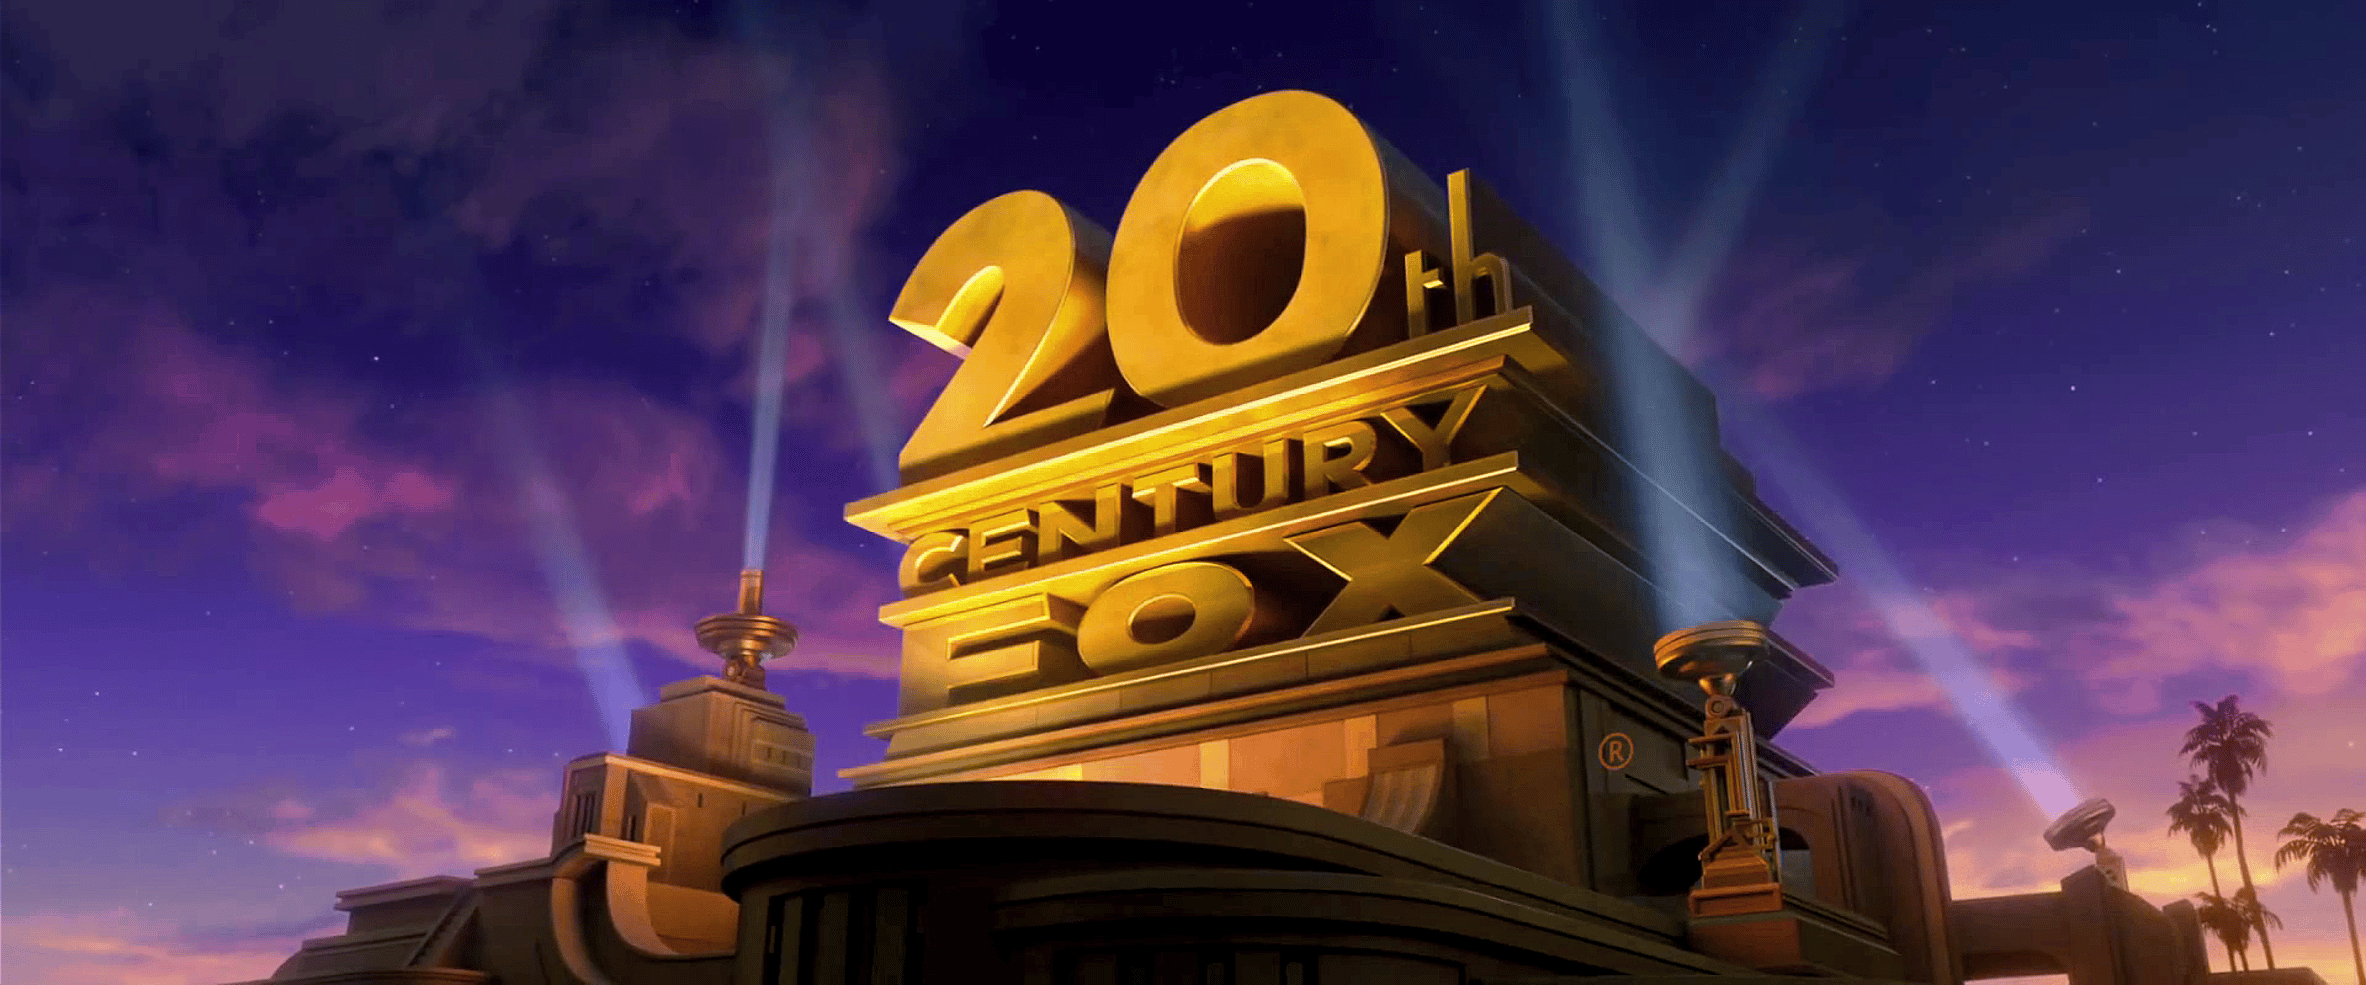 Casting Males & Females For 20th Century Fox‘s The Big Leap!